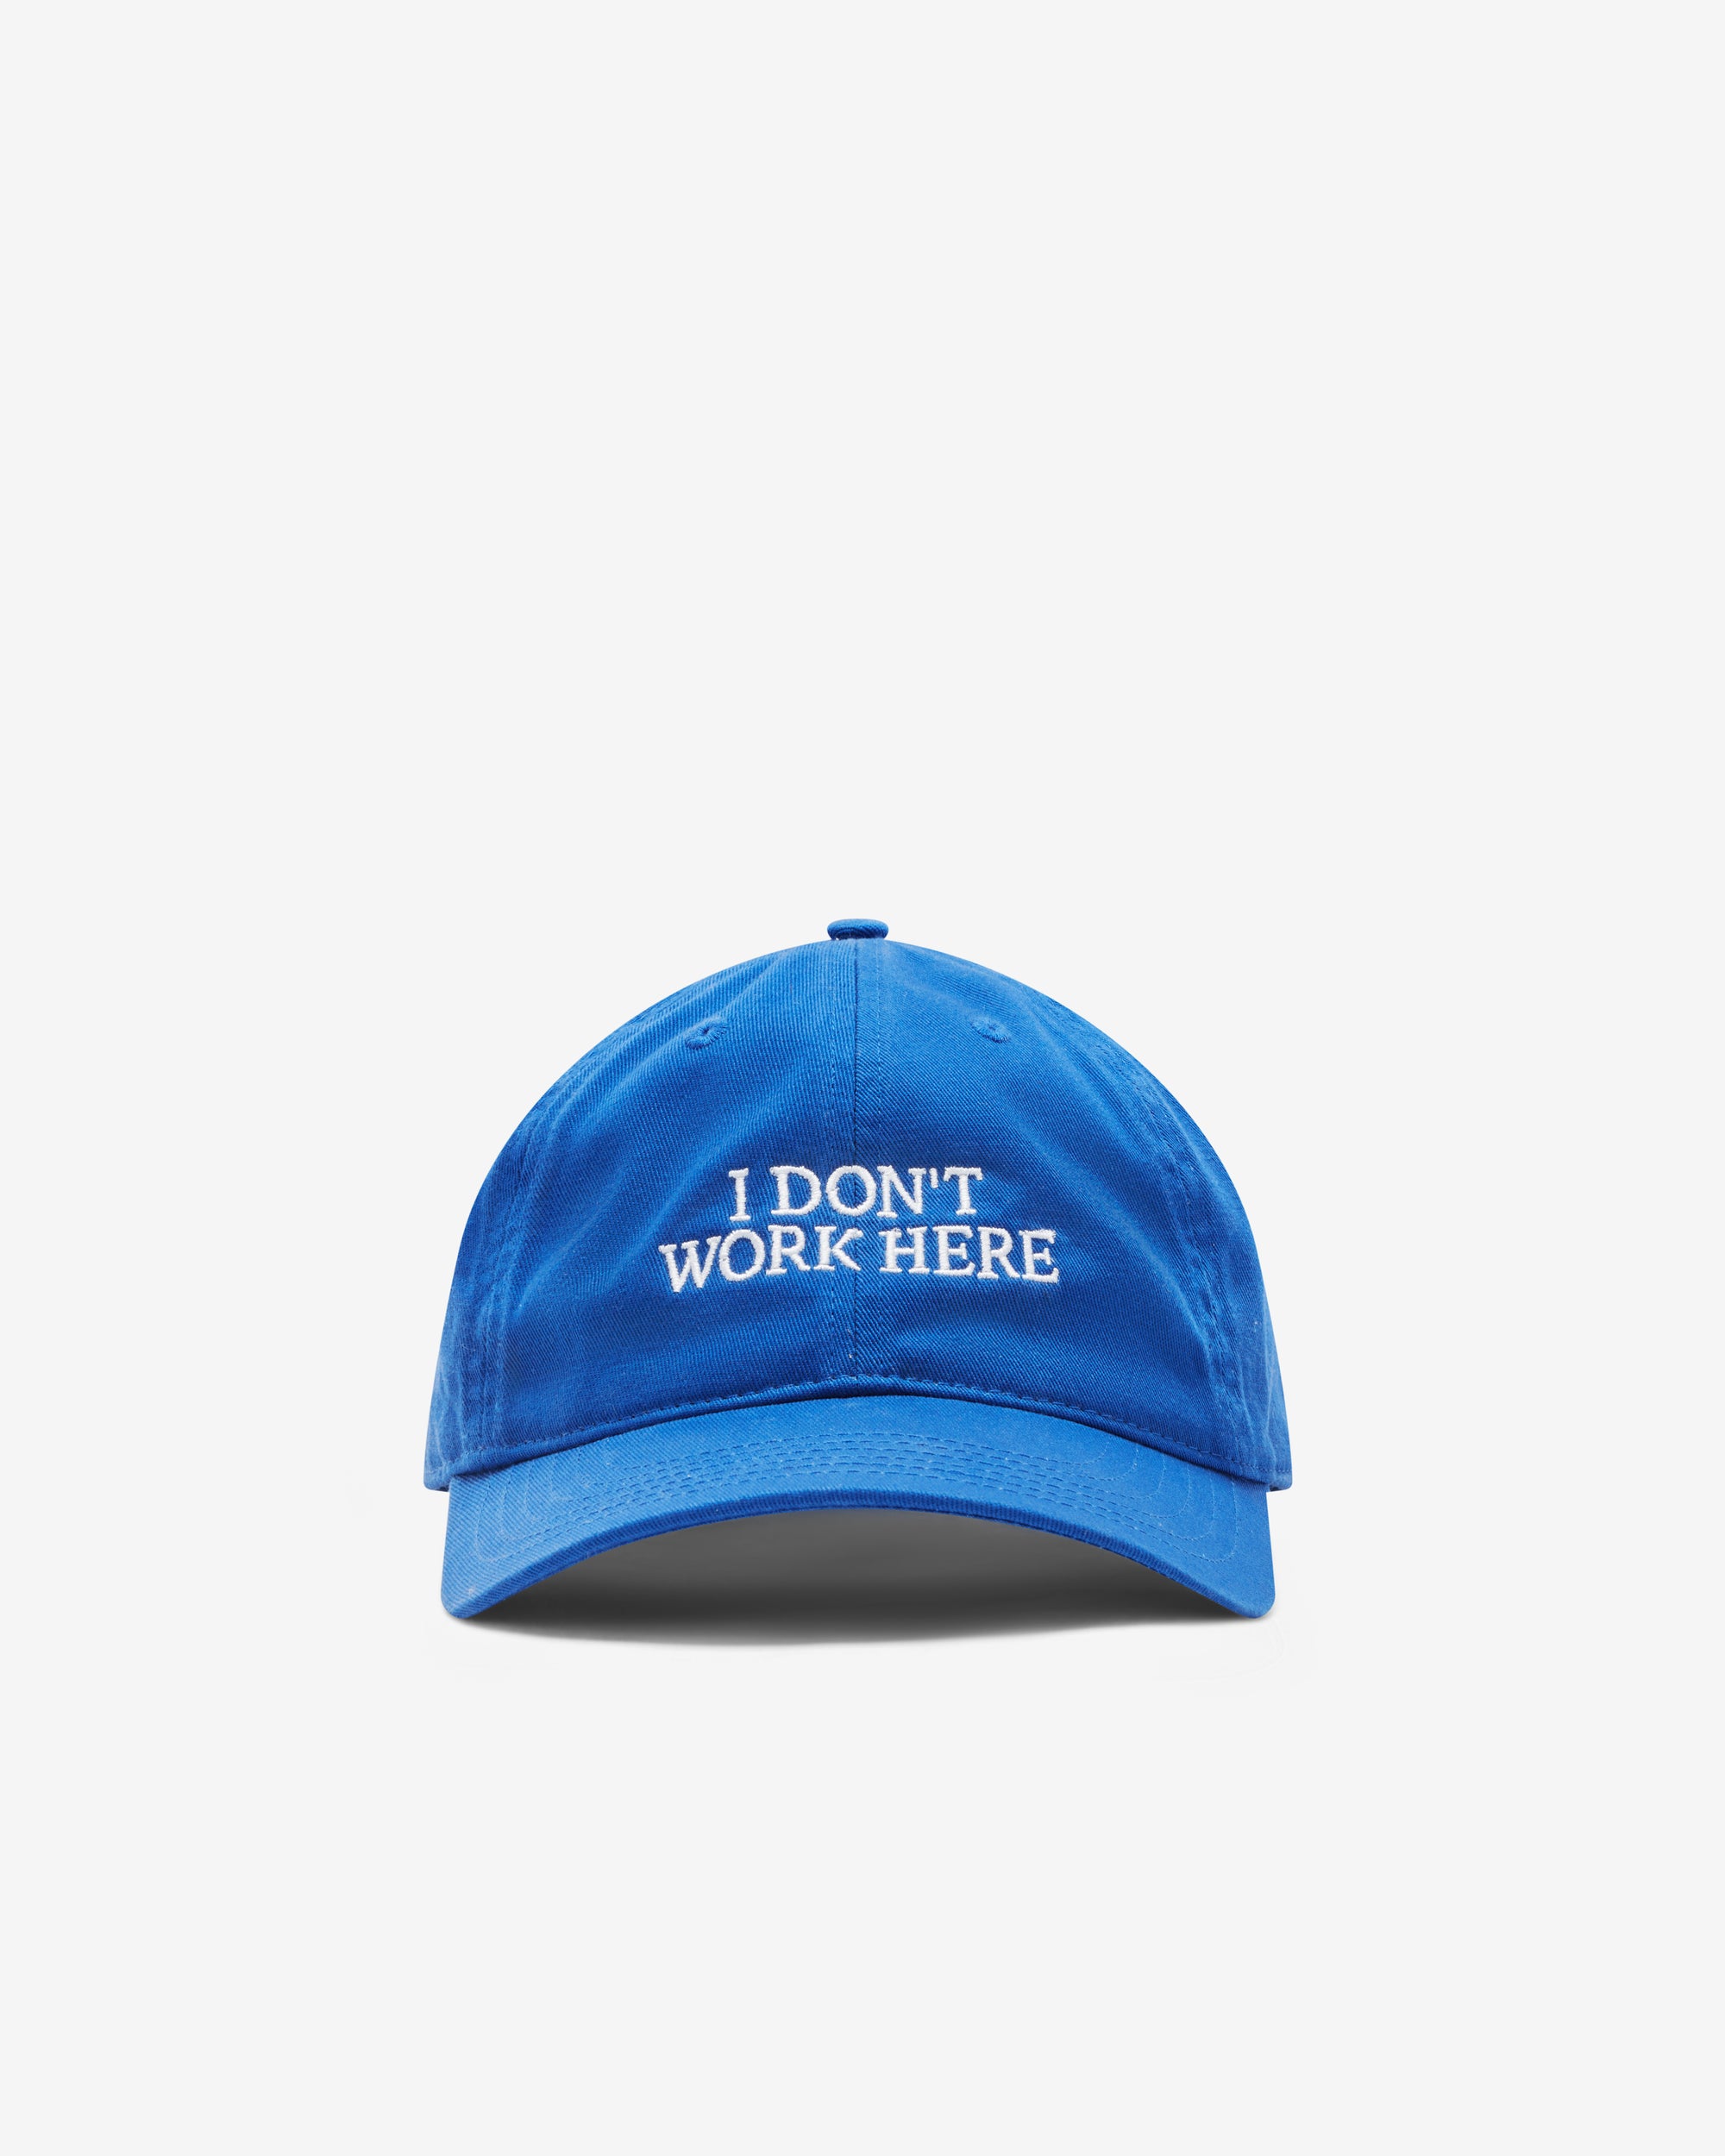 Idea Books - Sorry I Don'T Work Here Hat - (Blue)